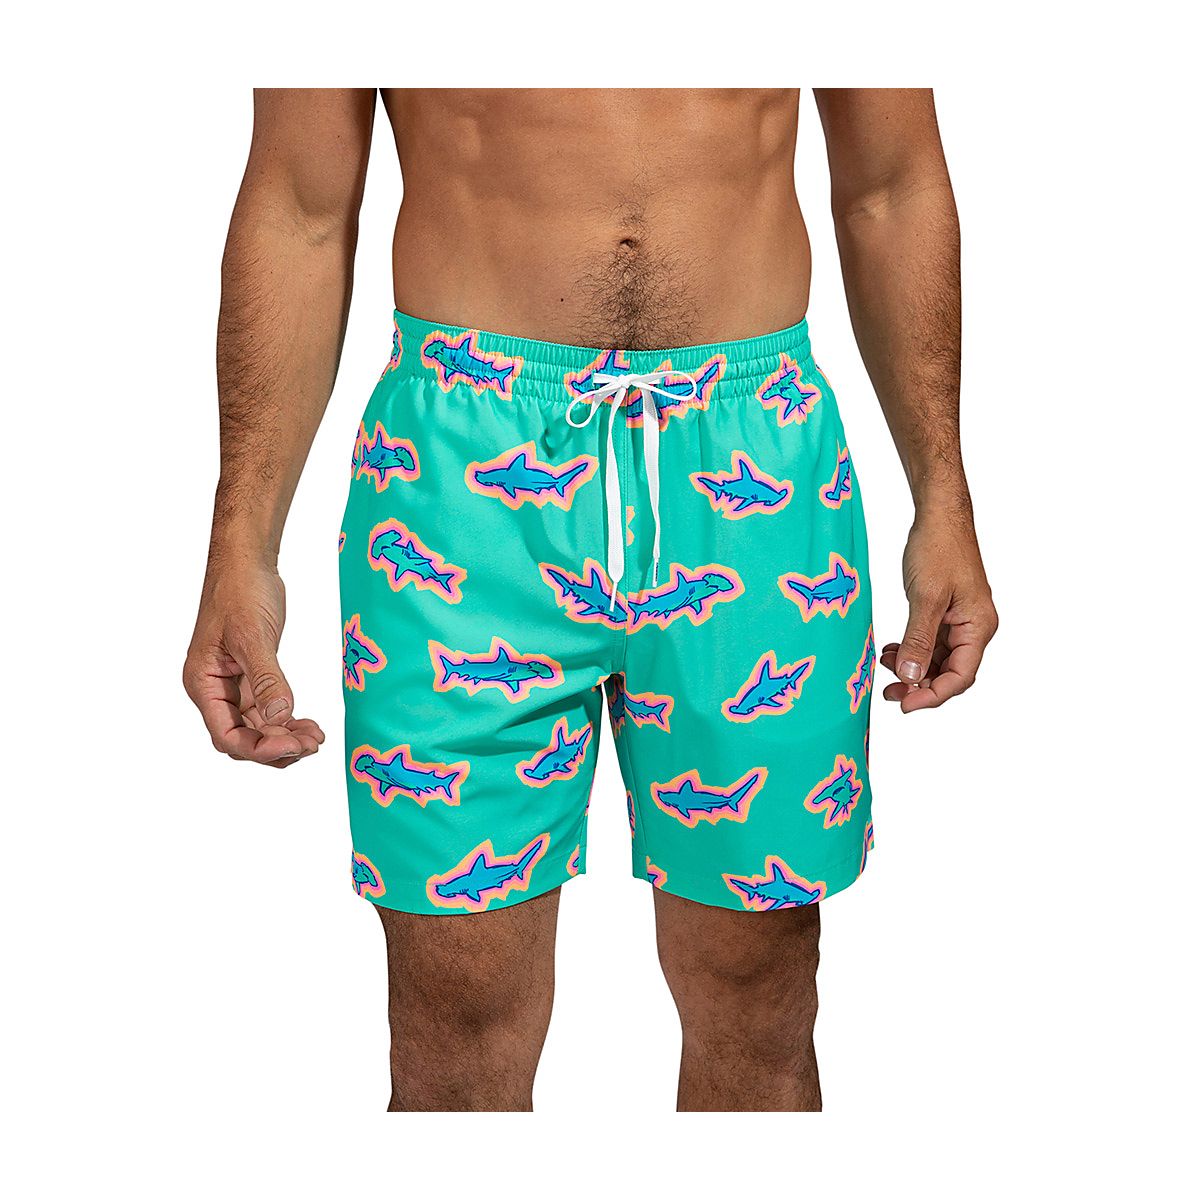 Chubbies Men's Apex Swimmers Lined Stretch Classic Swim Trunks 7 in ...